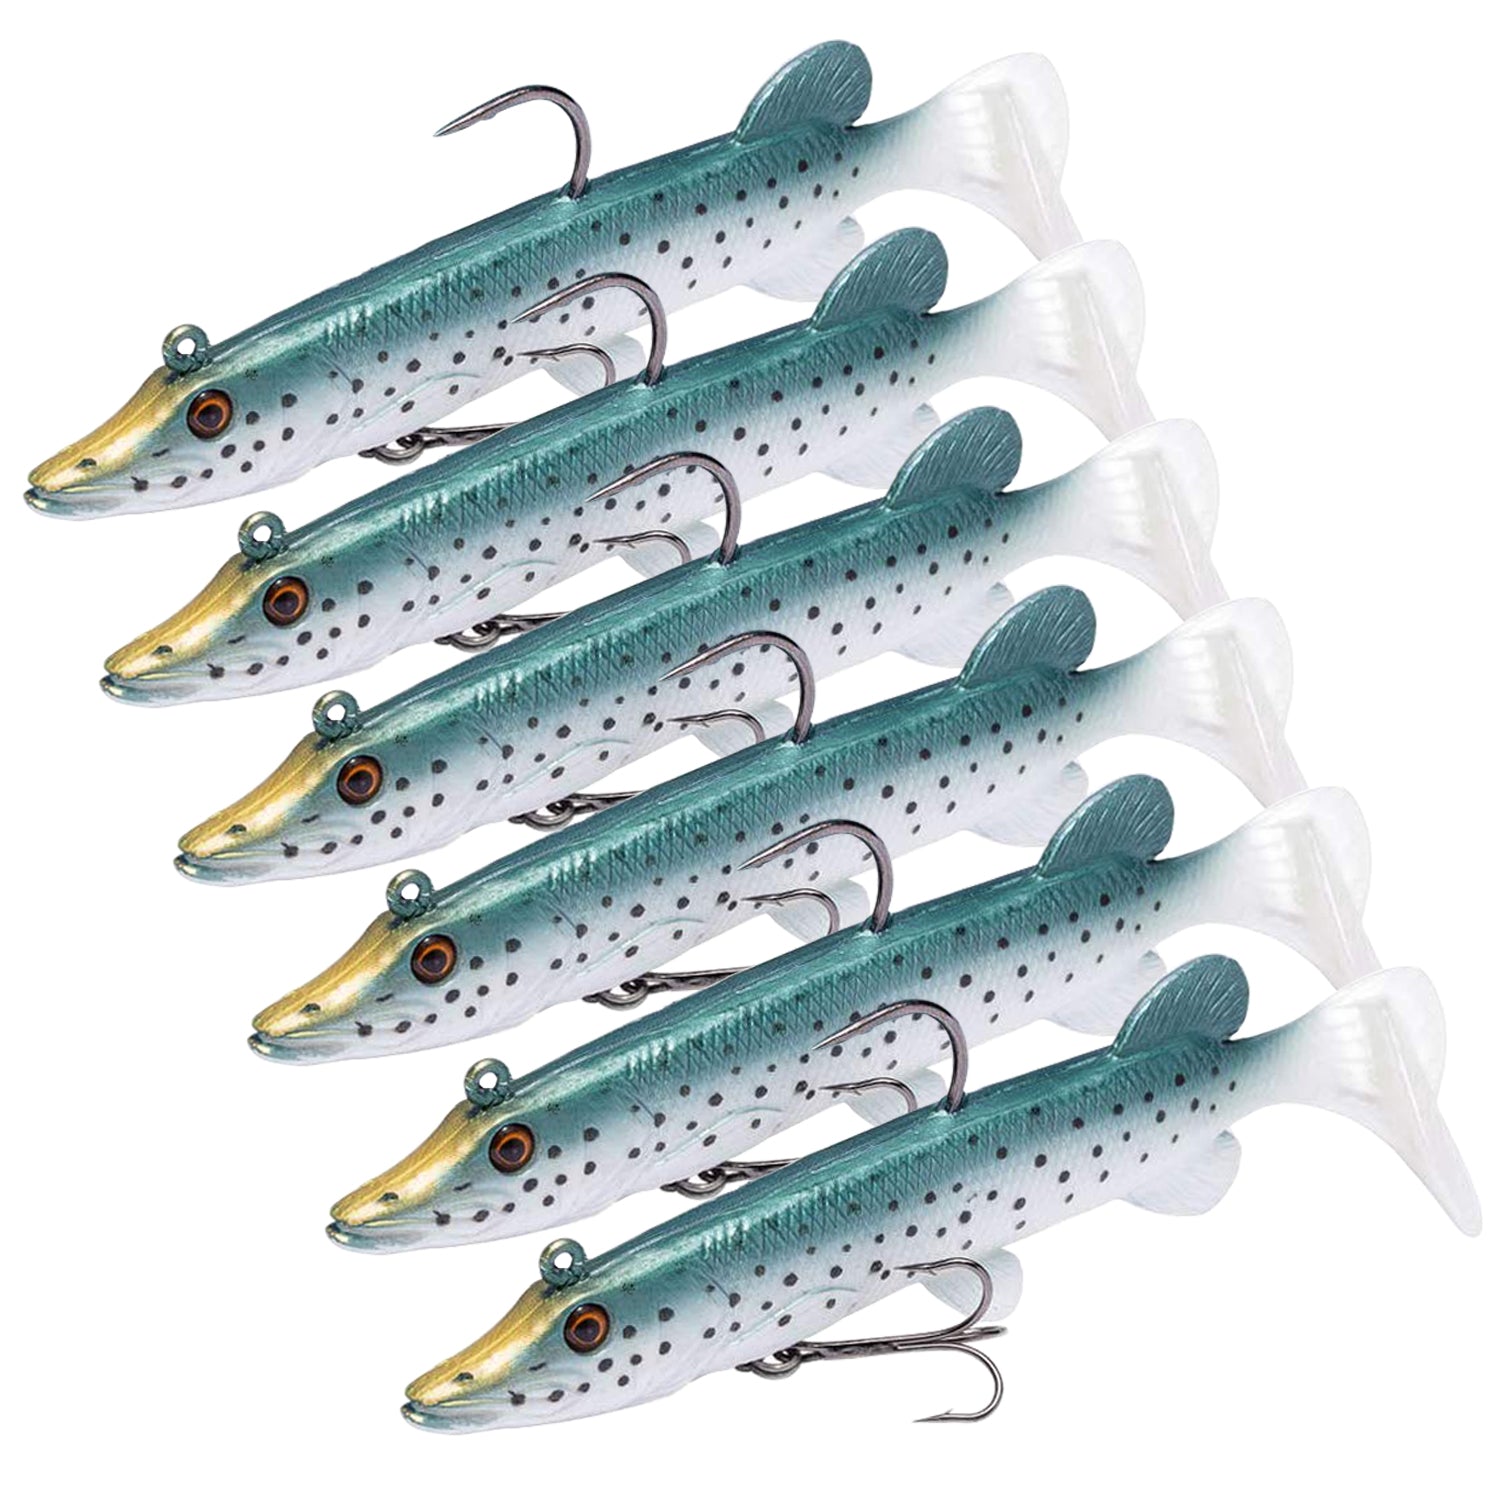 Spinpoler Paddle Tail Swimbaits Soft Plastic Fishing Lure Shad Bait Swimmer  For Trout Crappie Bass Pike Fishing Saltwater